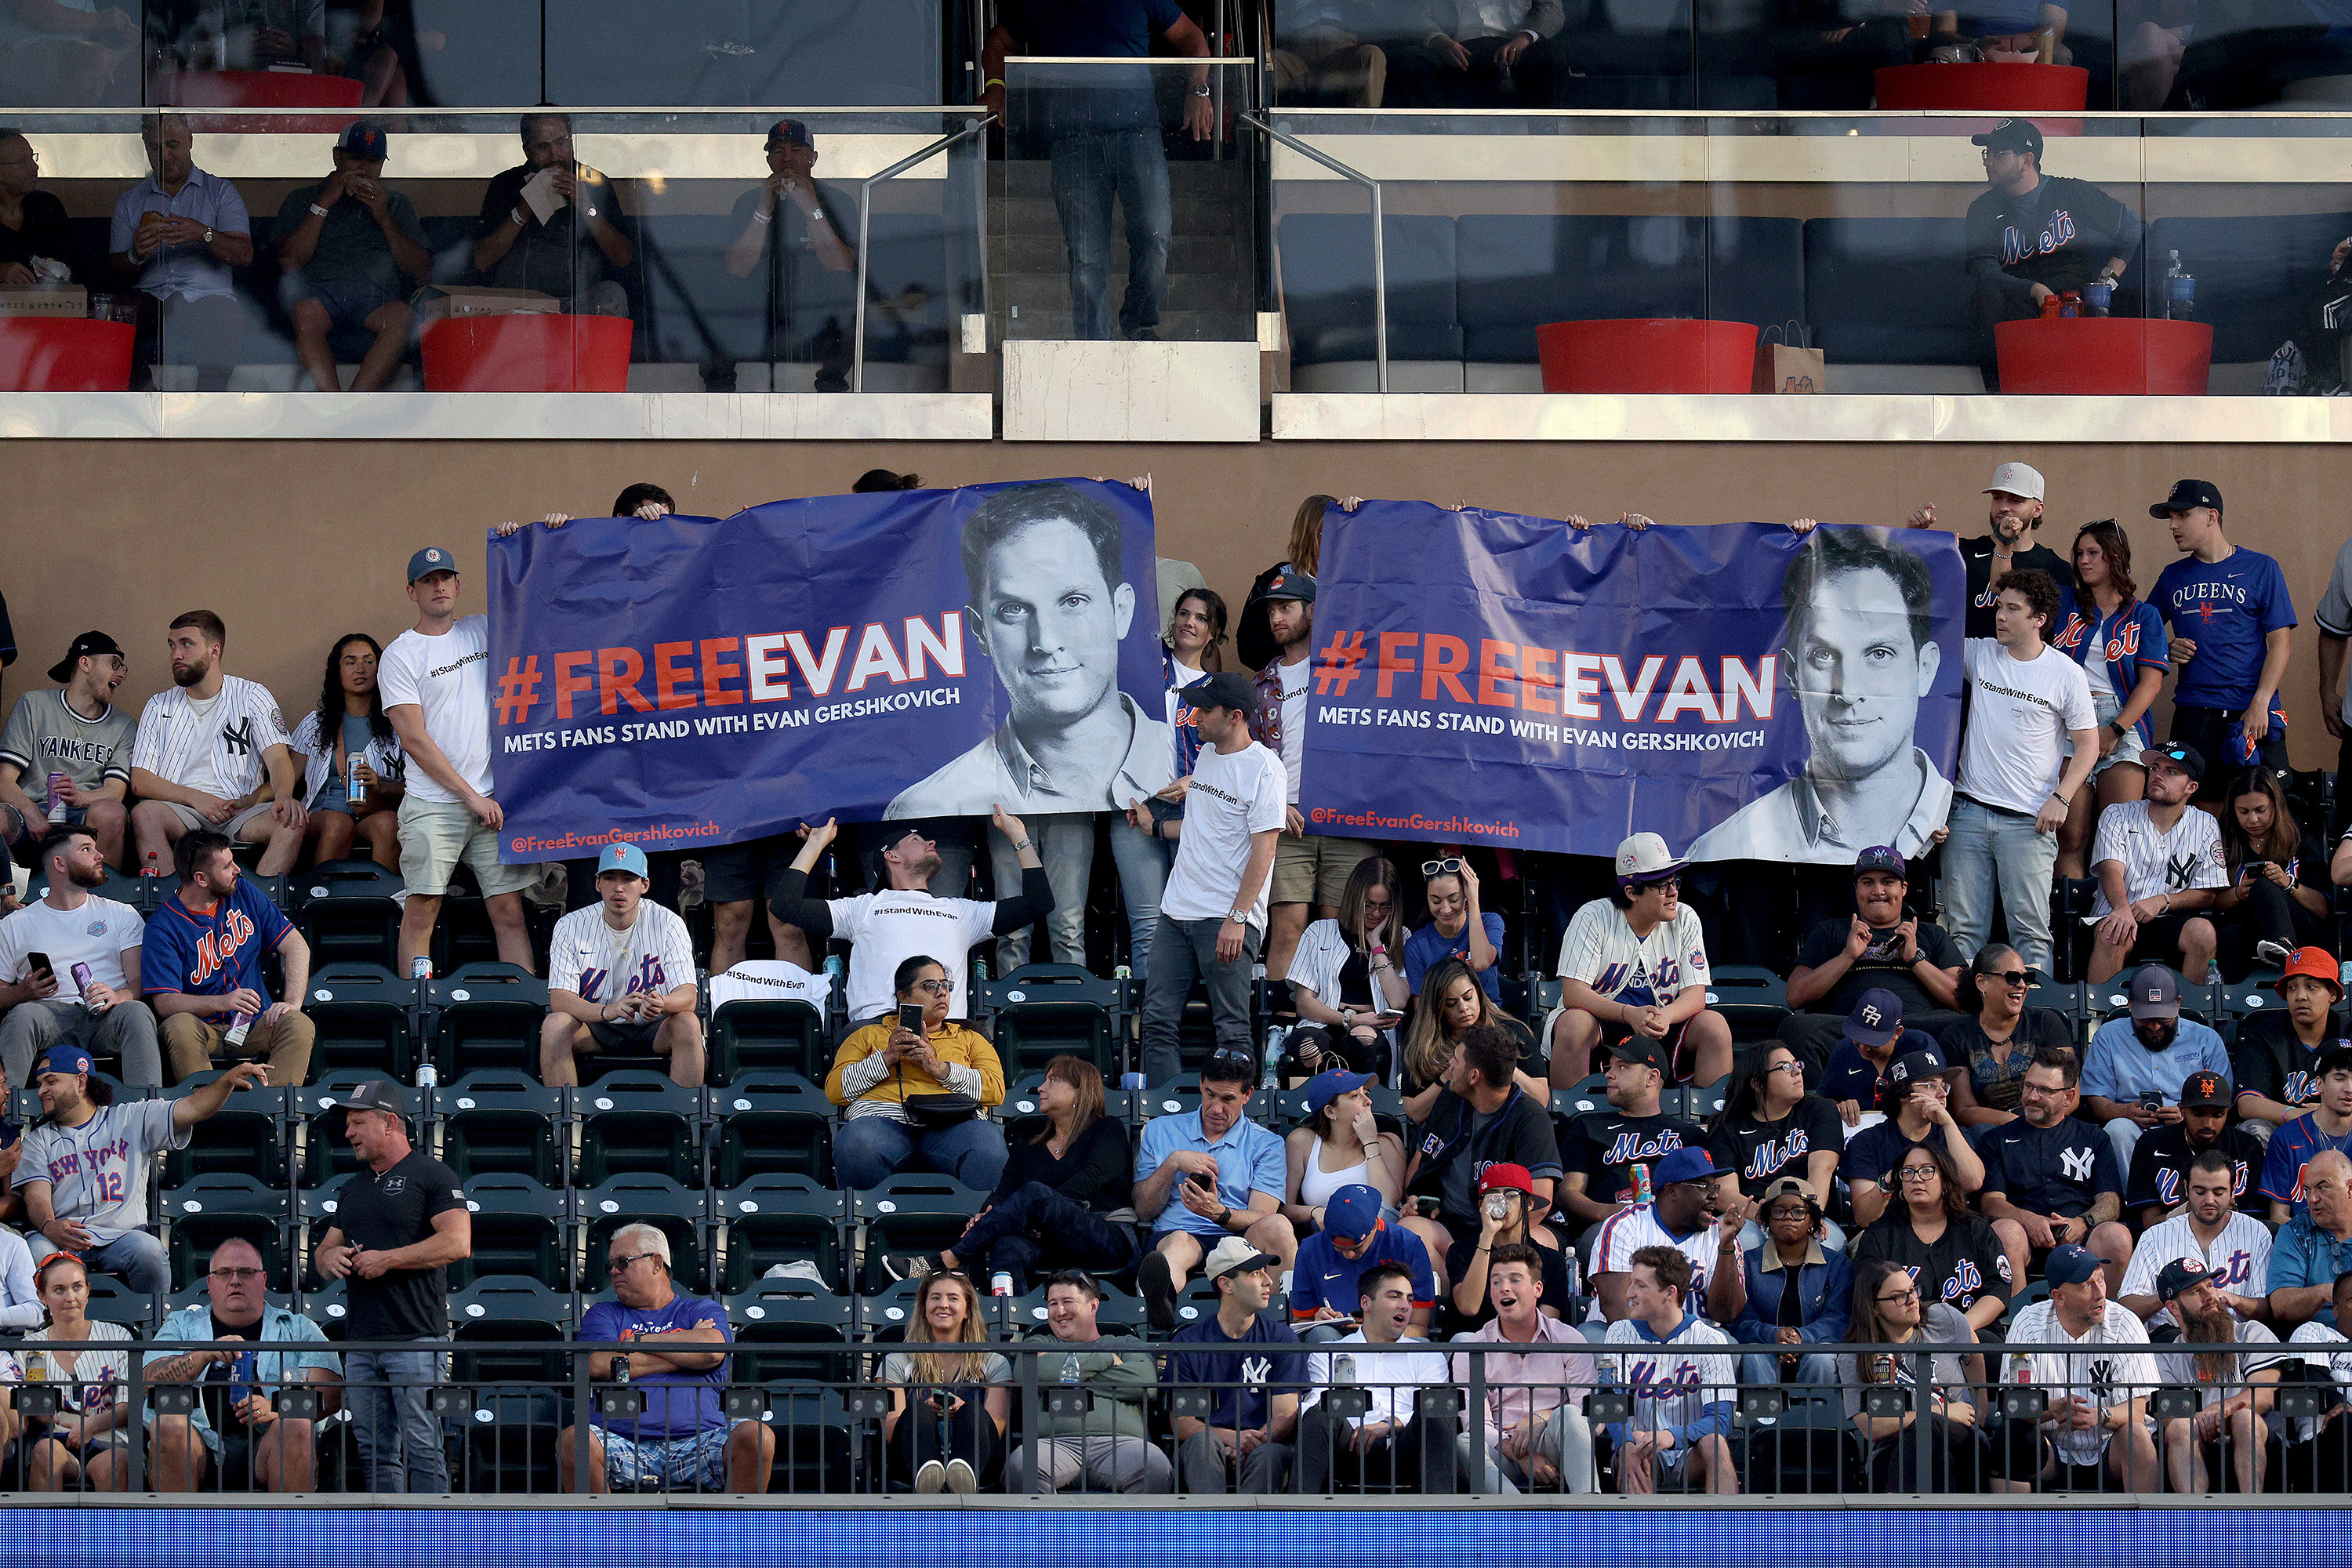 Friends of detained Wall Street Journal reporter Evan Gershkovich during a New York Mets and New York Yankees baseball game. Photo: TNS